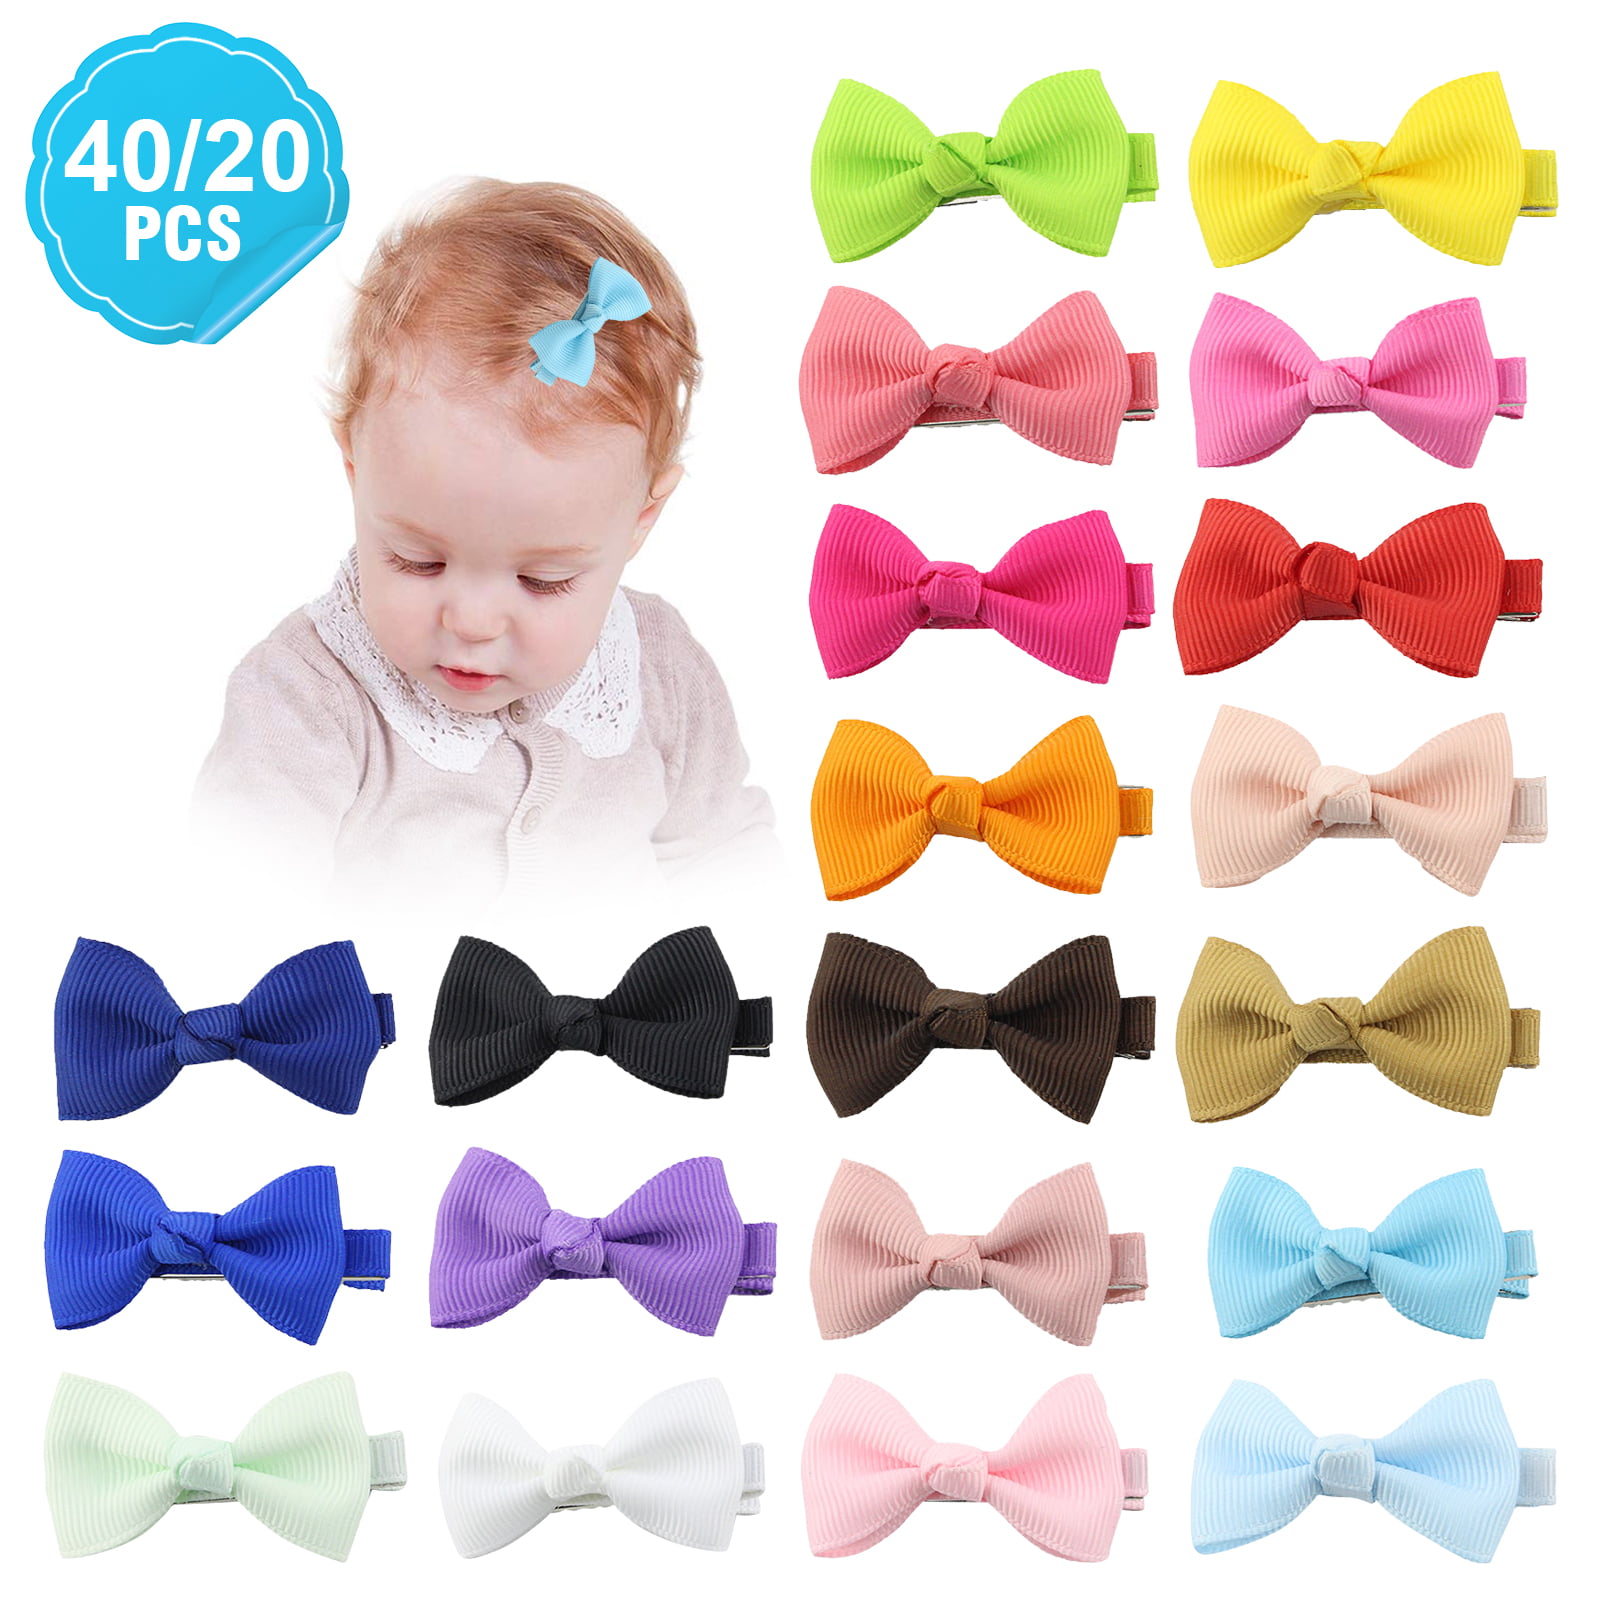 Details about   30Pcs Multi-Color Grosgrain Ribbon Hair Bows Alligator Clips Toddler Baby Girls 